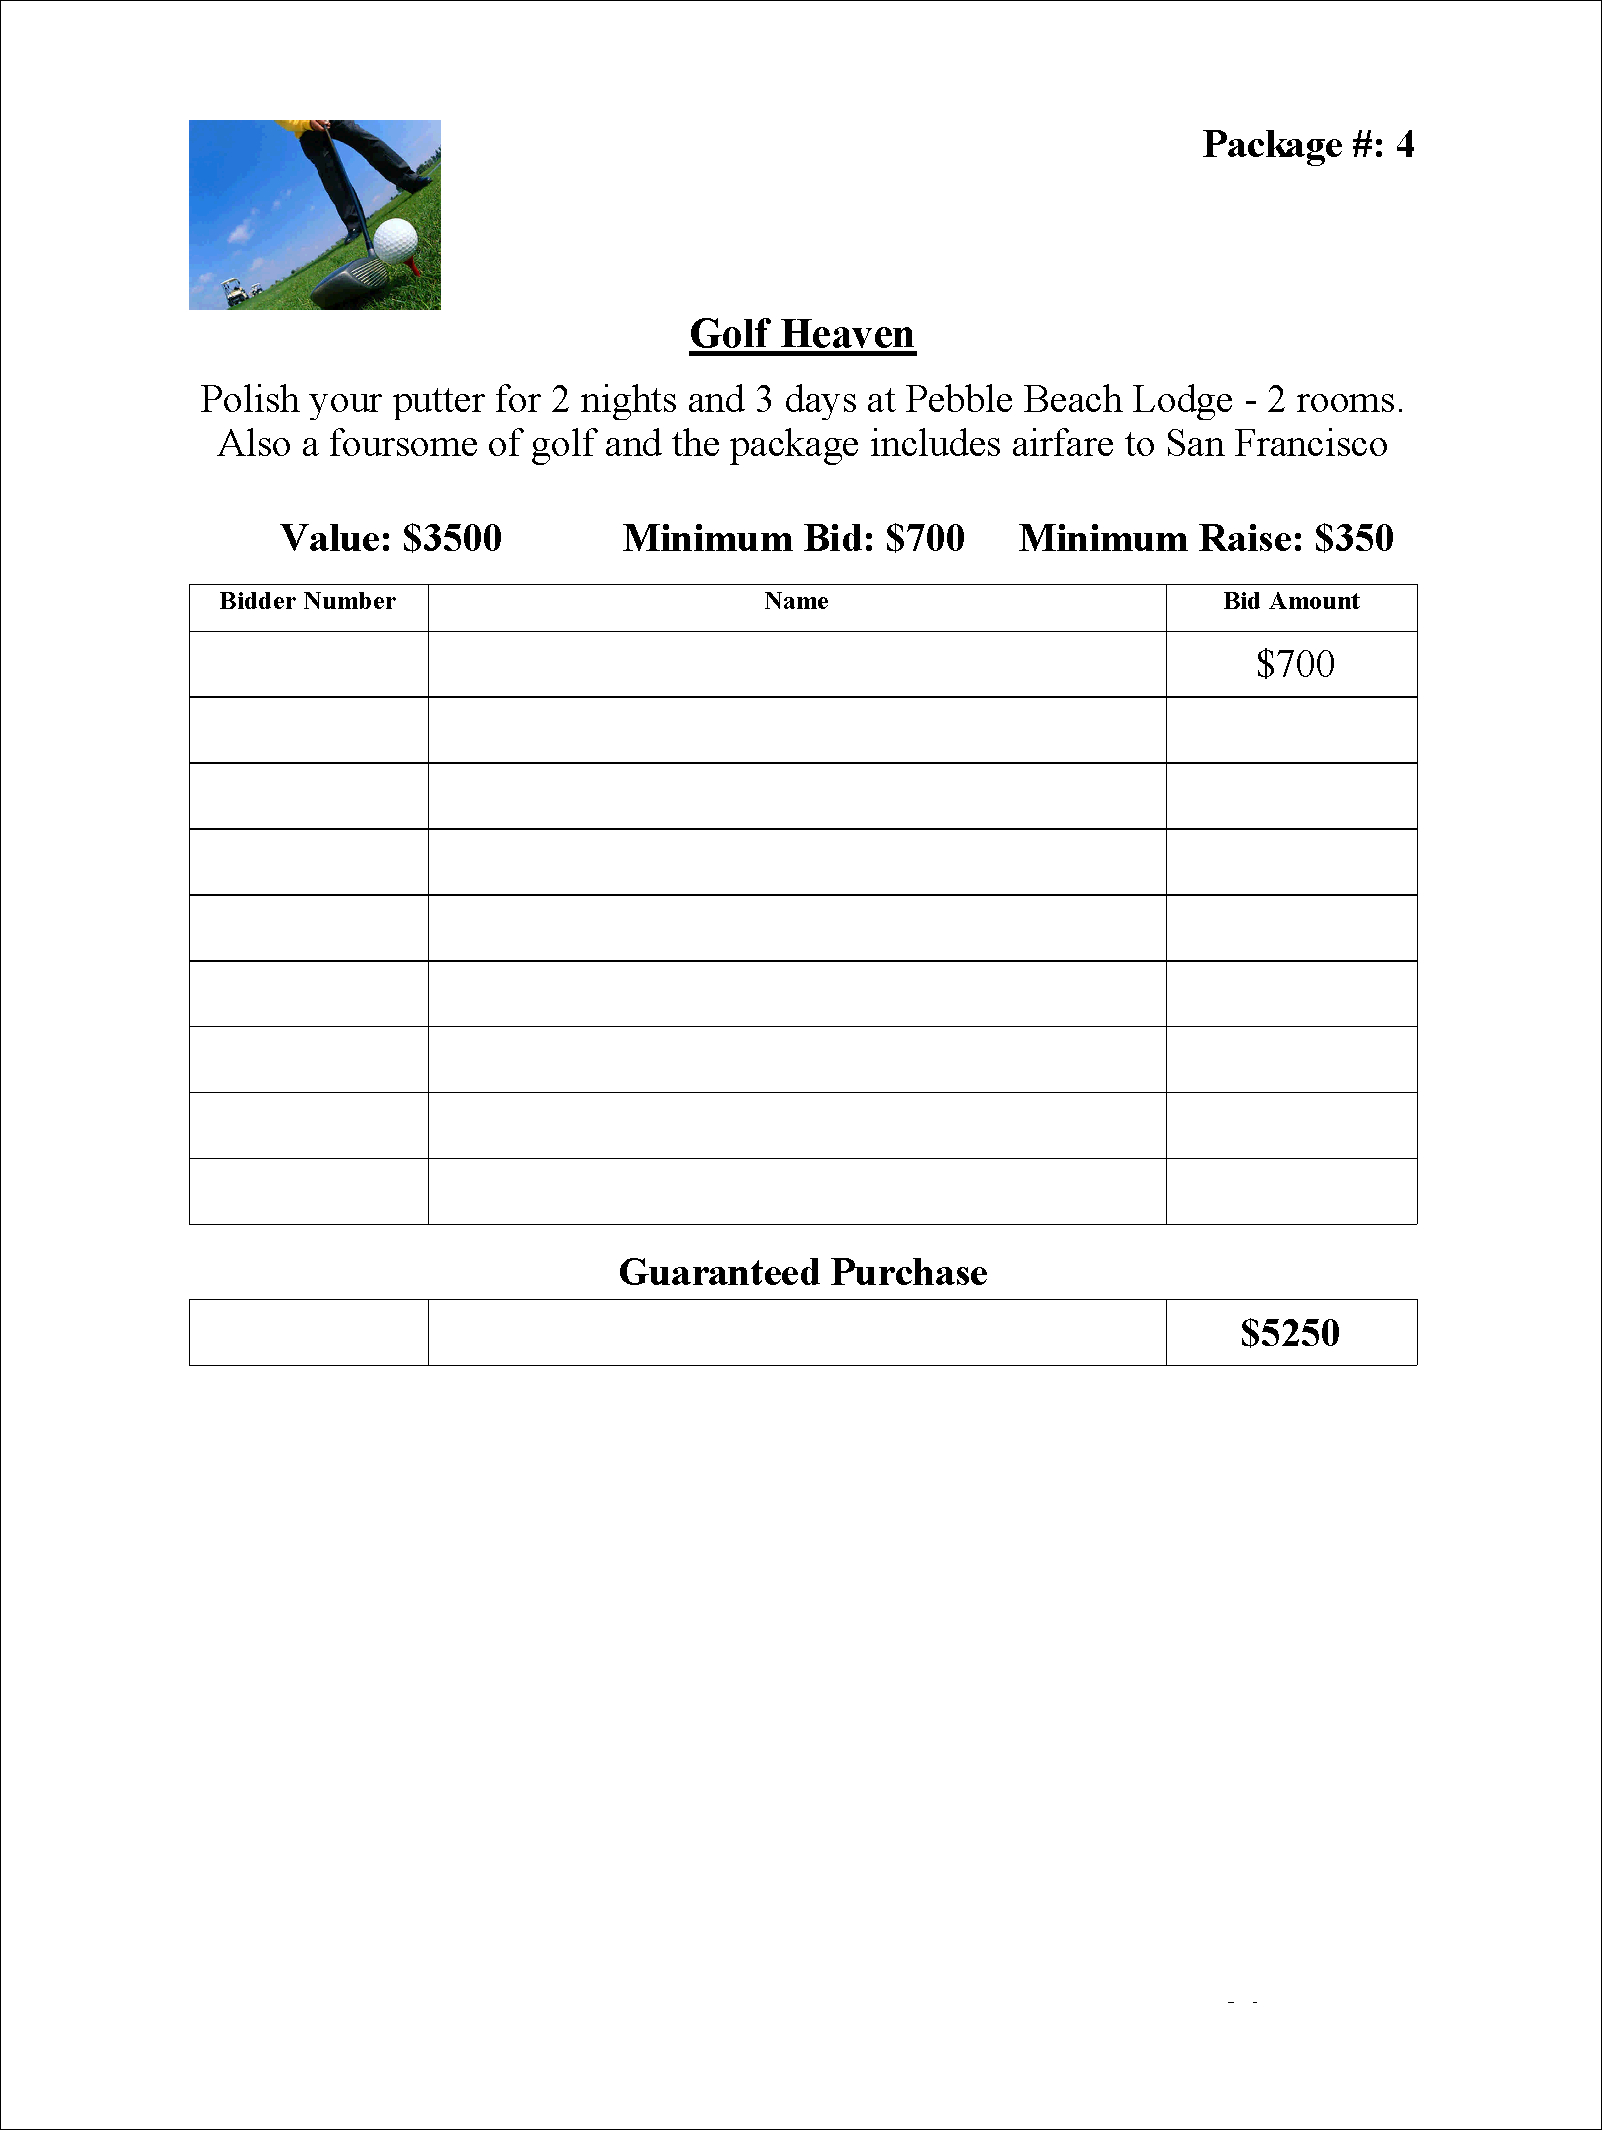 Sample Bid Sheet Out Of Greater Giving Eso Software | School Inside Auction Bid Cards Template